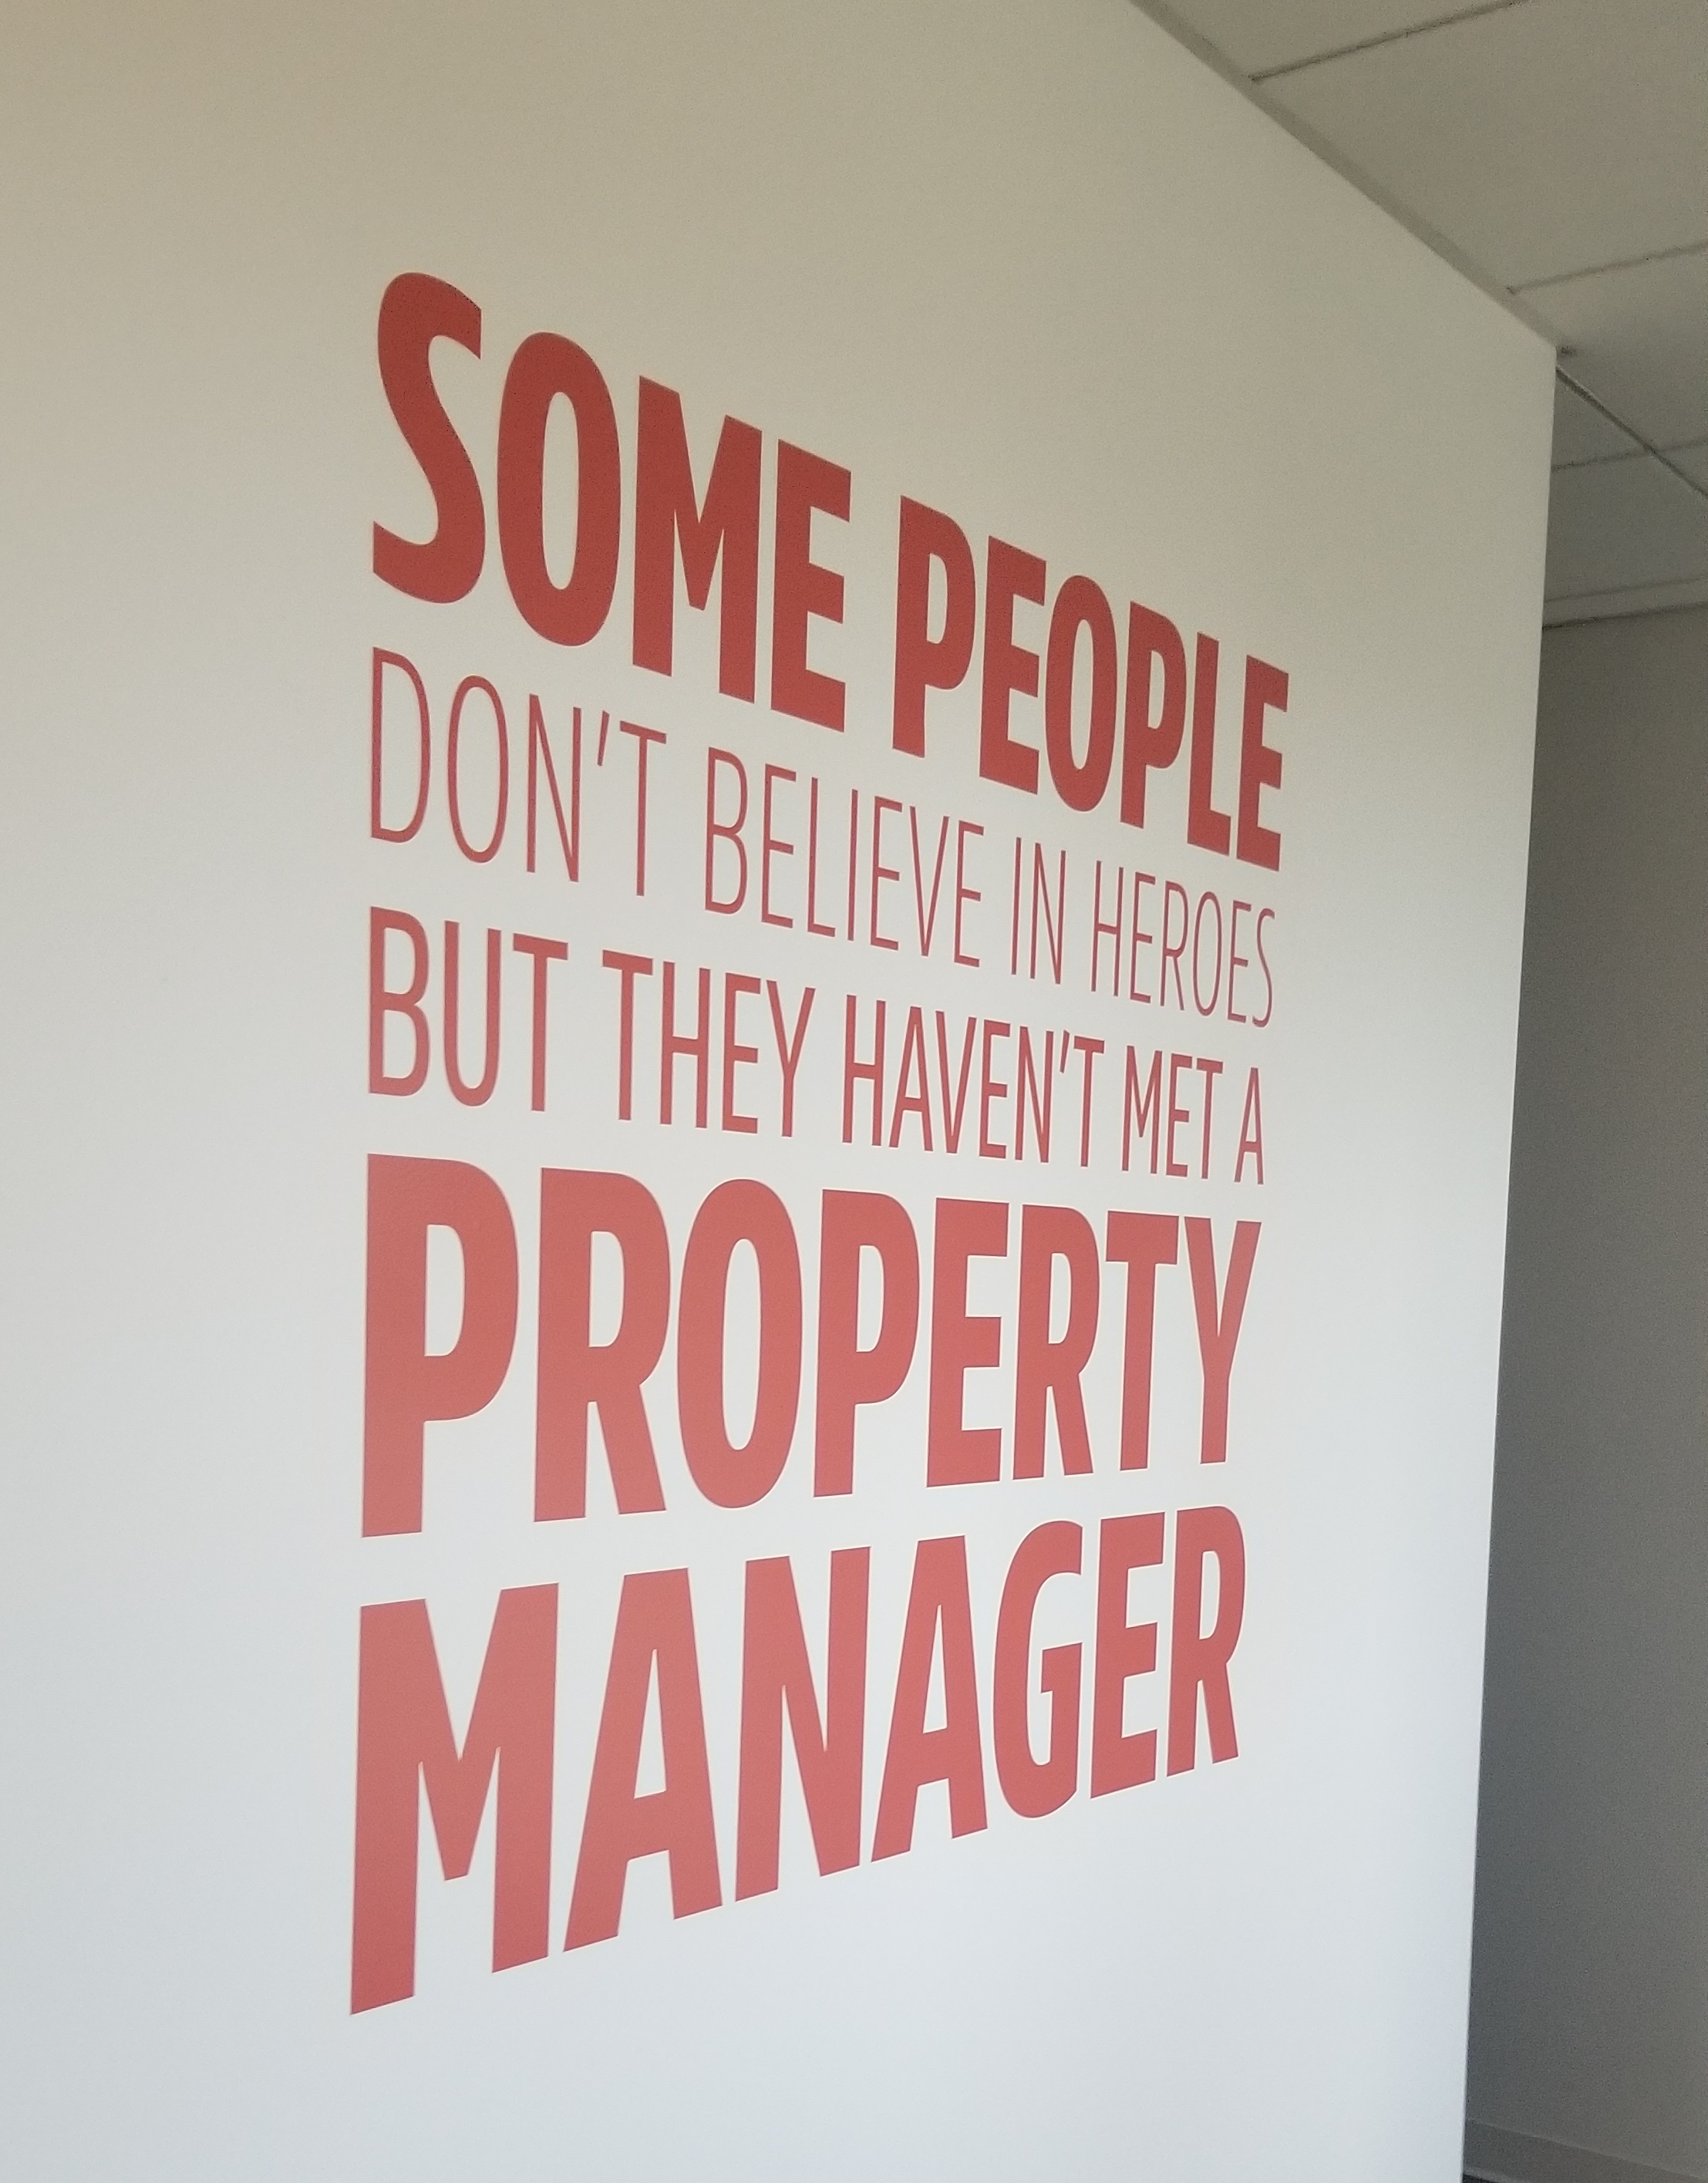 Part of the ongoing sign package for the Jones and Jones' Woodland Hills office. We decorated it with inspiring quotes wall graphics.